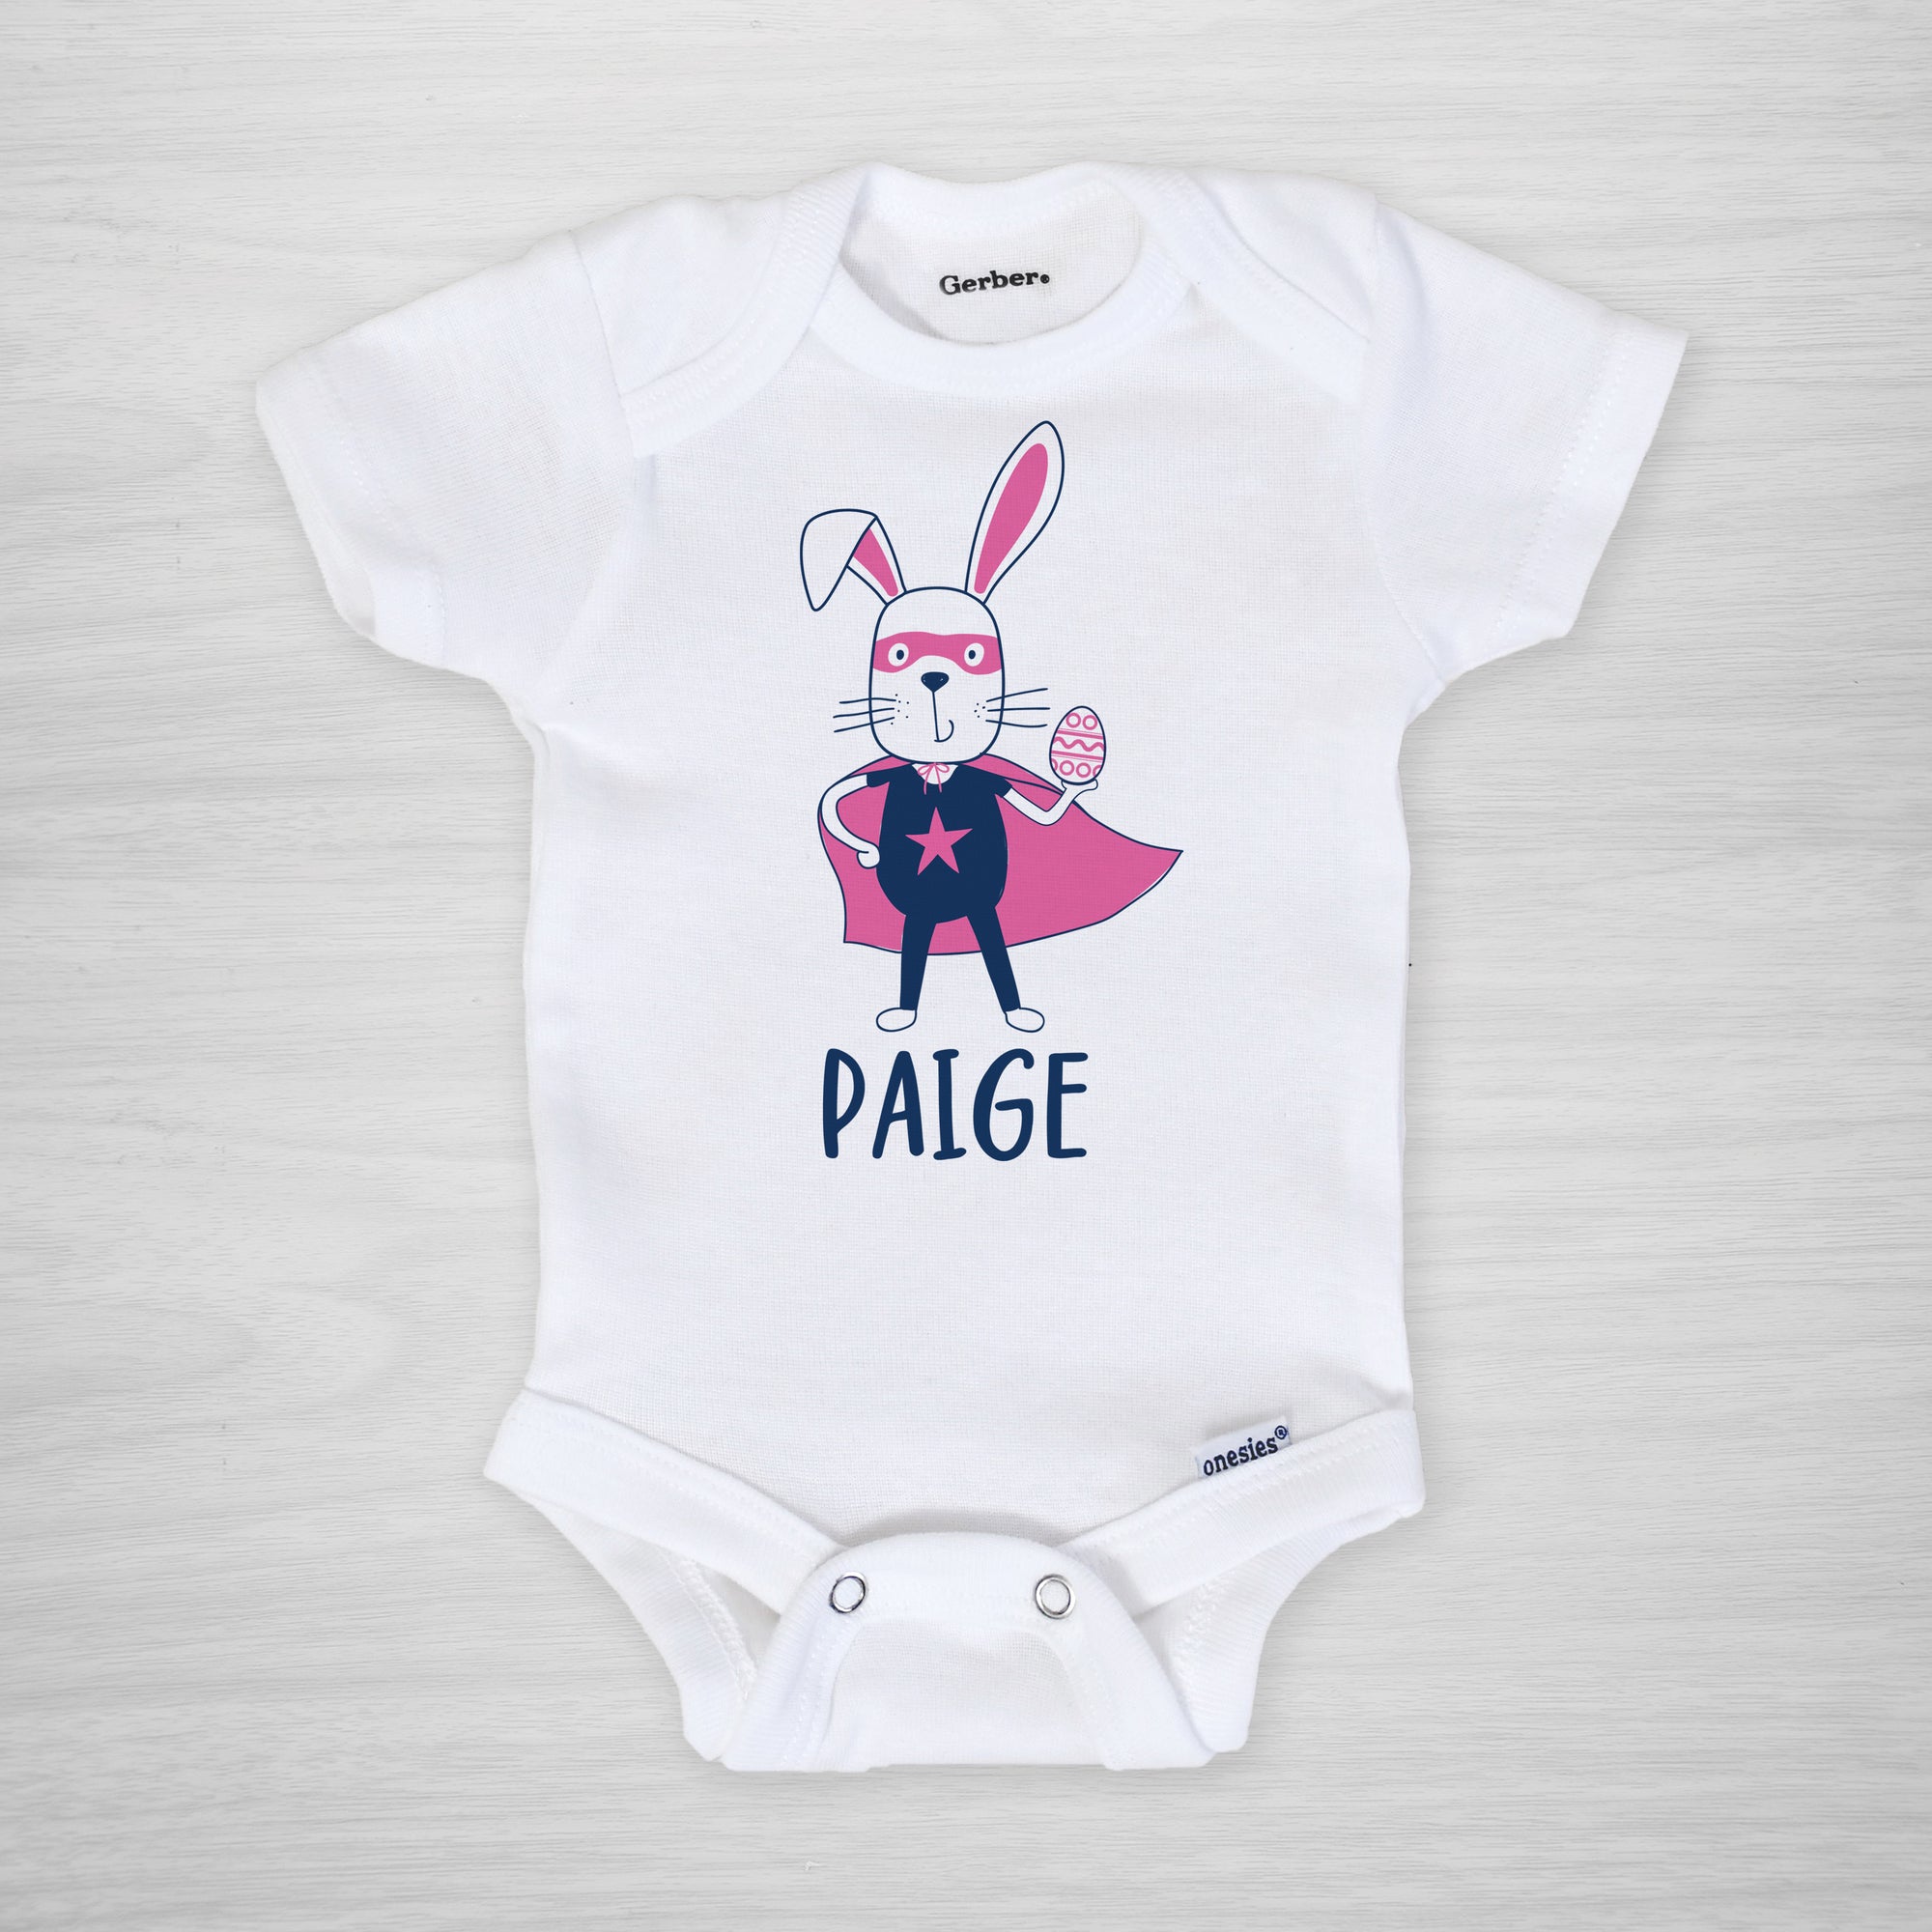 Superhero Easter Bunny with a cape, mask, and egg on this personalized Gerber Onesie®, long sleeved pink